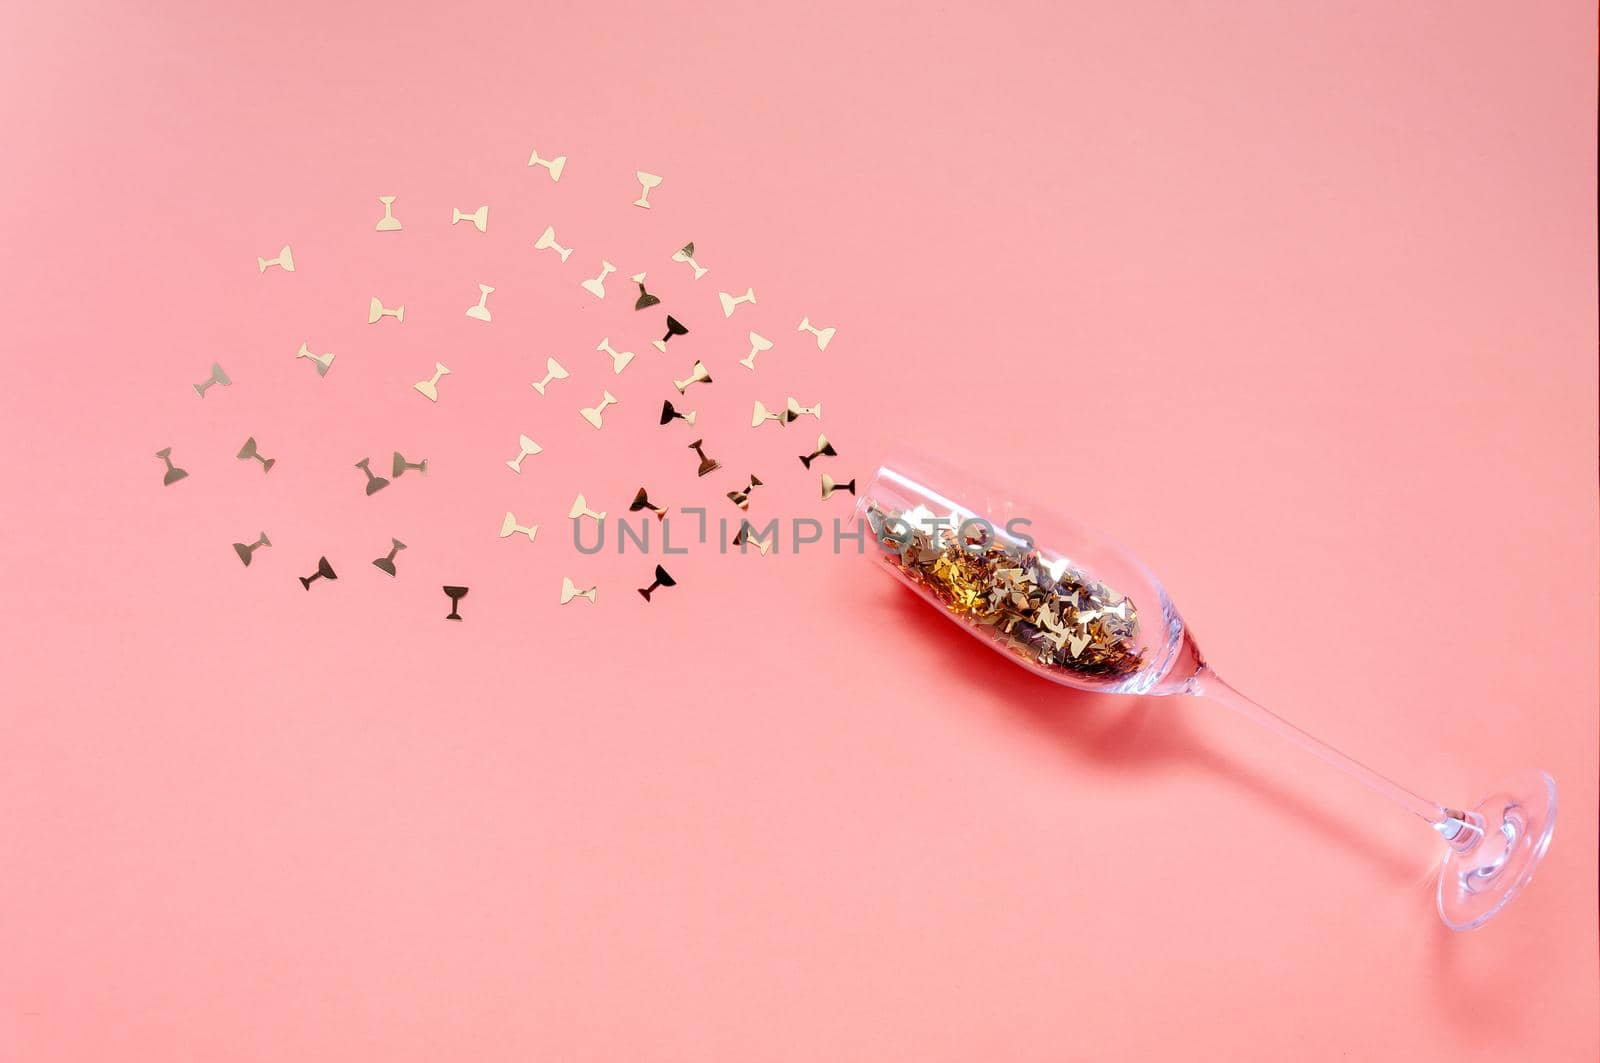 Champagne Glass with Golden Confetti on Pink Background. Creative Christmas Concept.